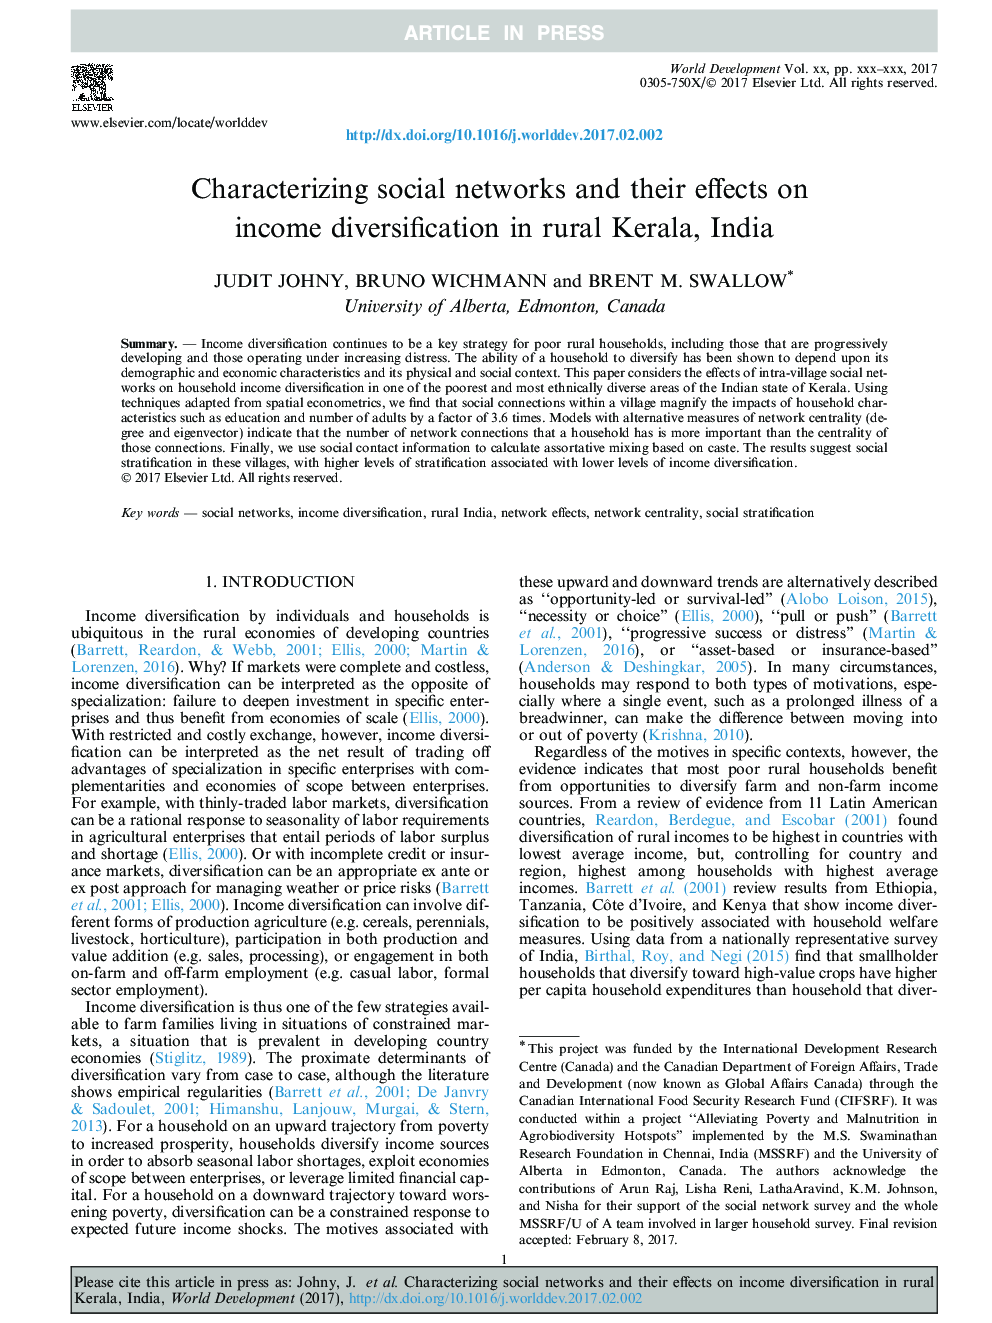 Characterizing social networks and their effects on income diversification in rural Kerala, India